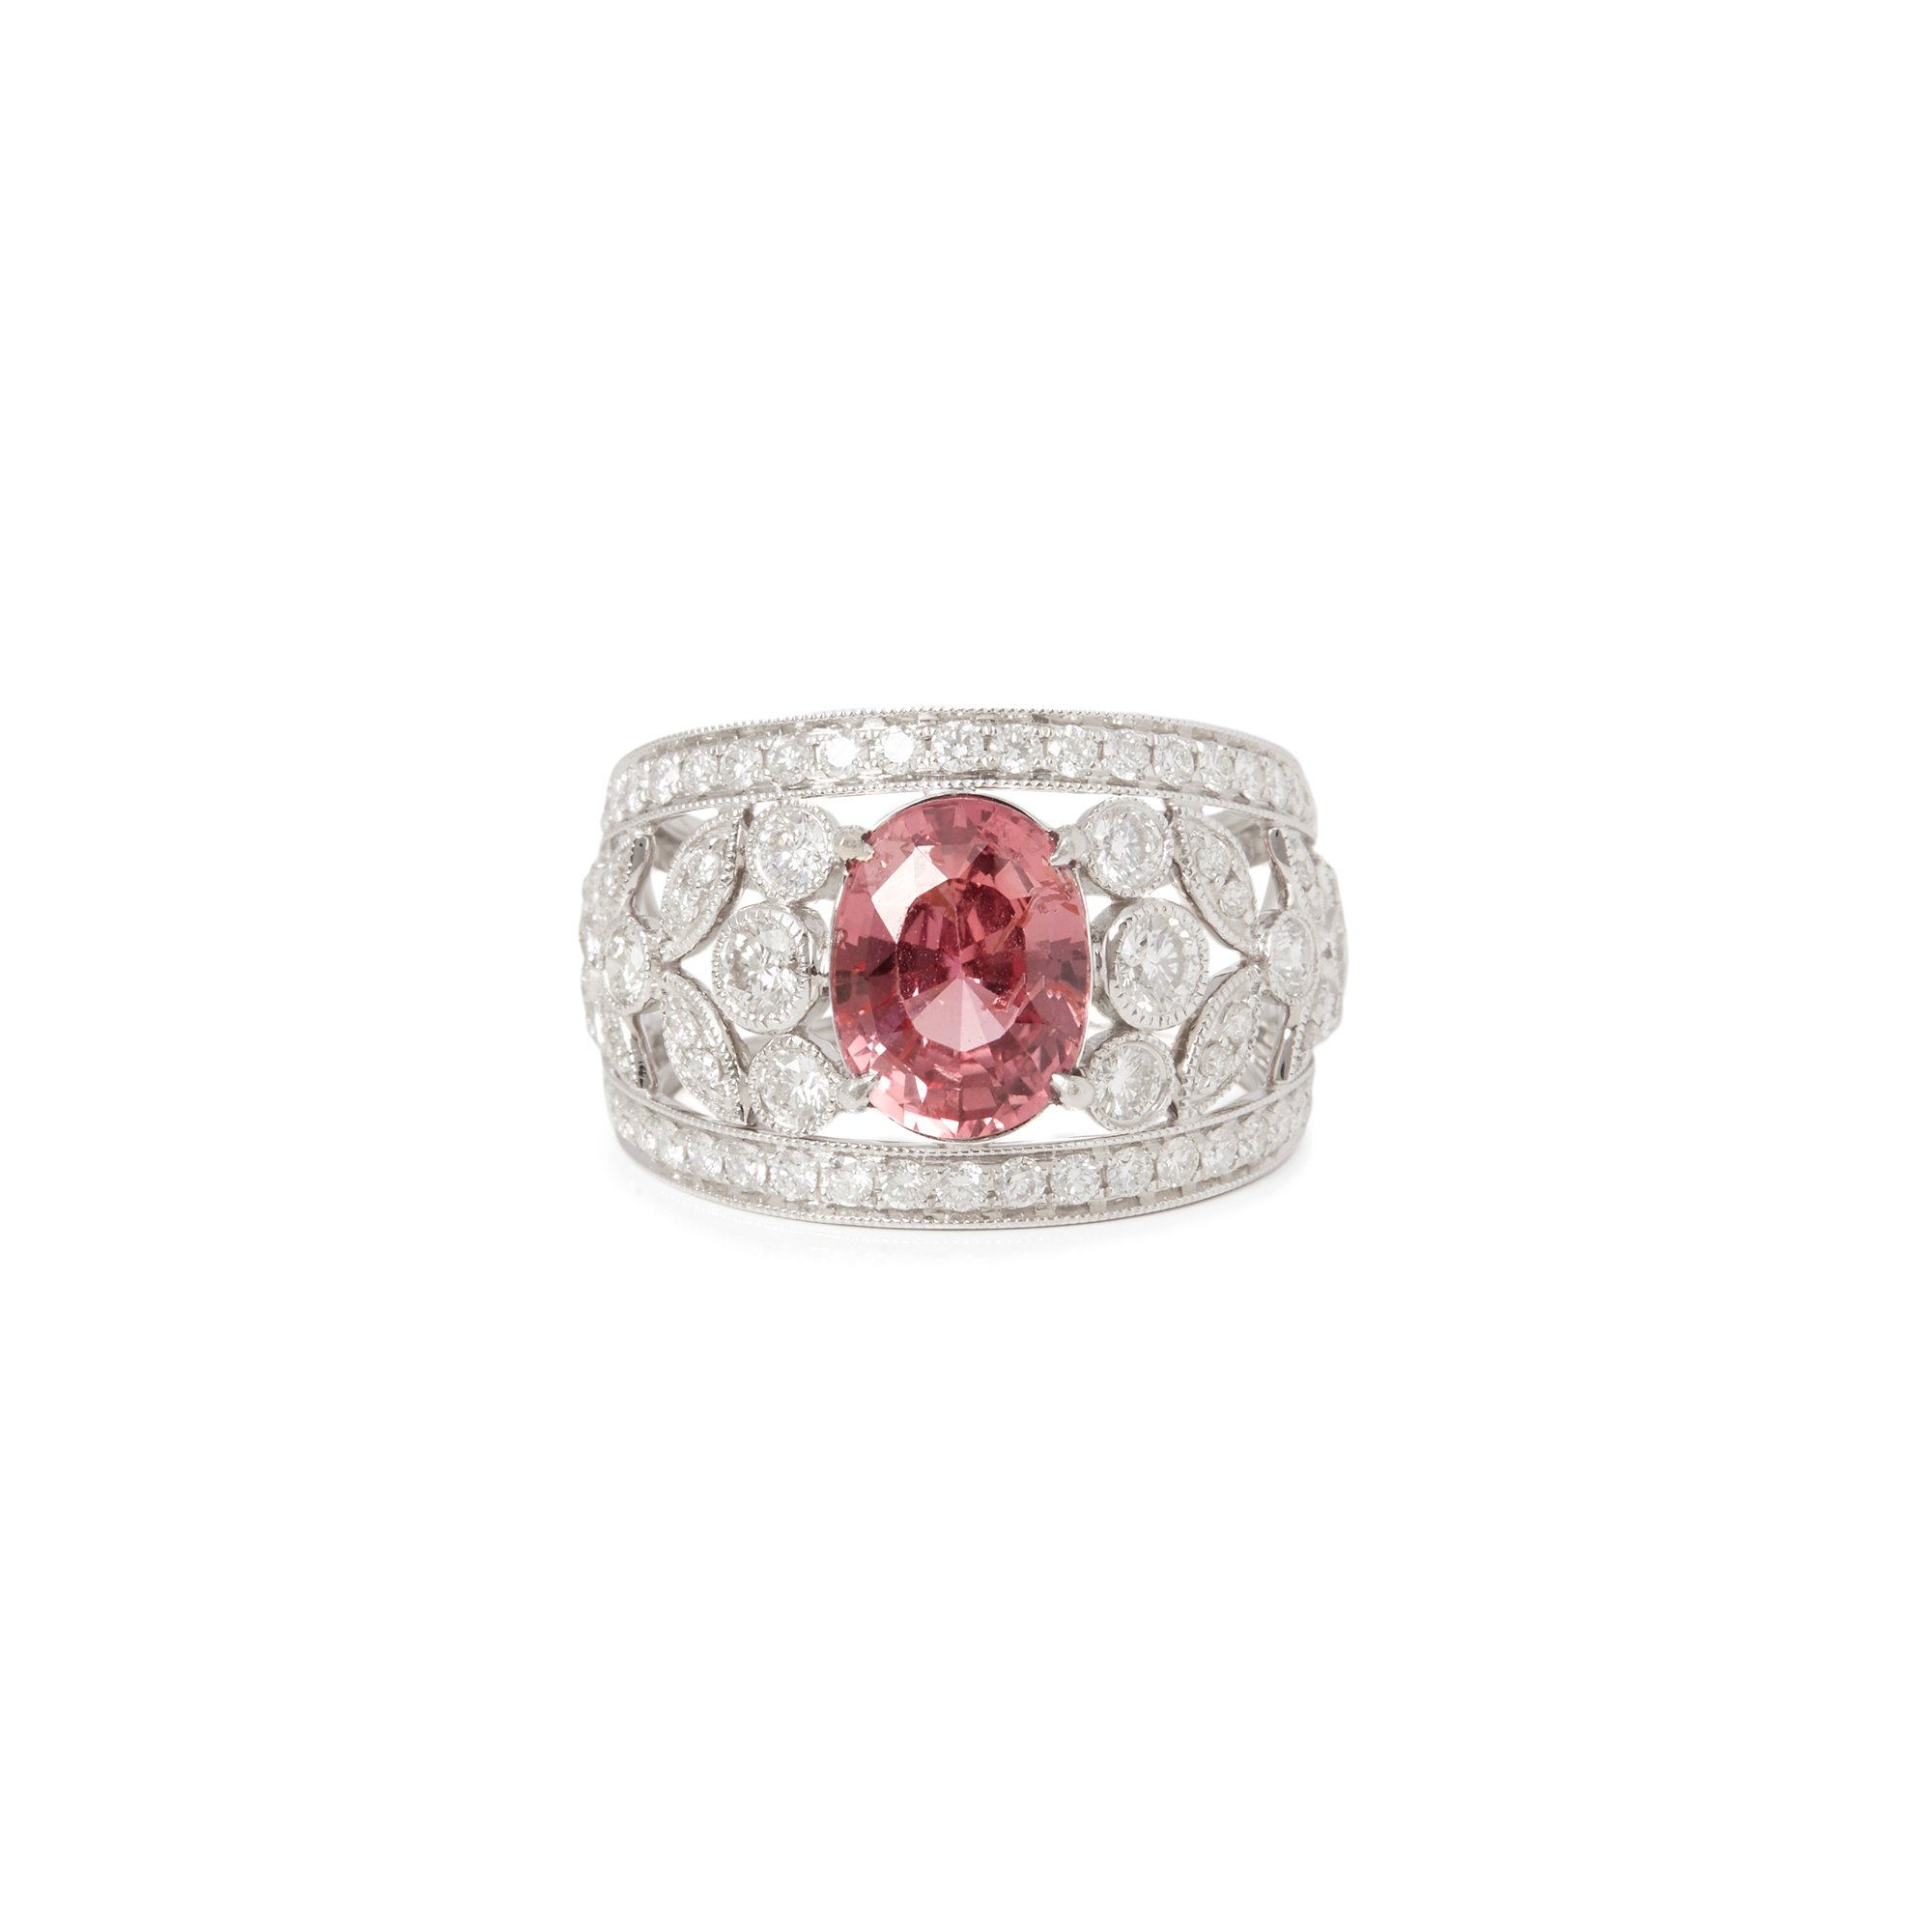 David Jerome Certified 3.19ct Unheated Padparadscha Sapphire and Diamond 18ct Gold Ring